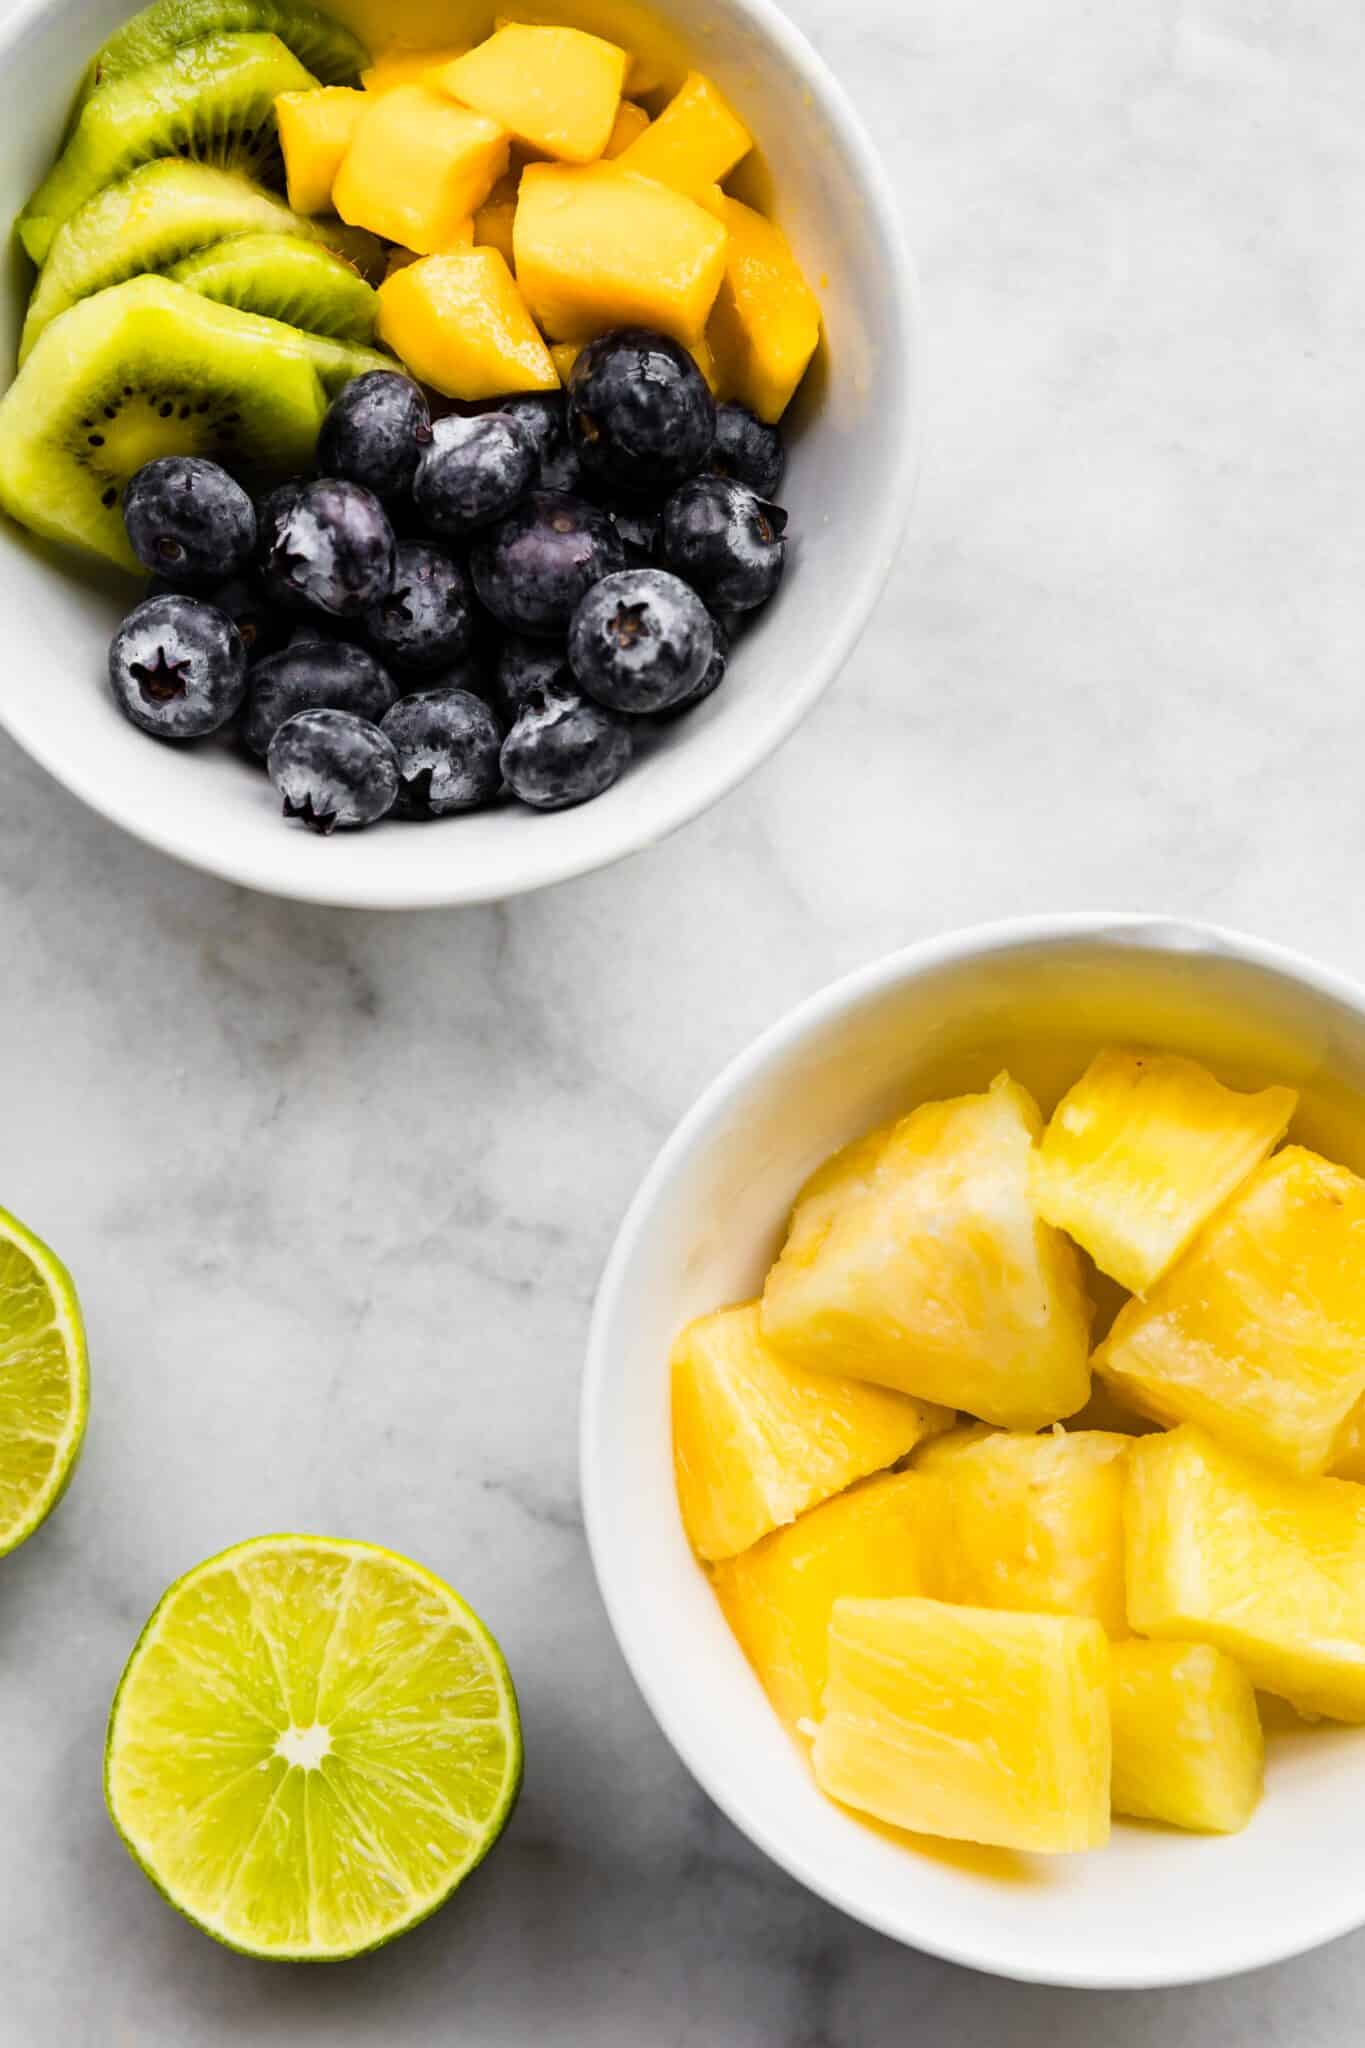 Overhead photo of bowls of pineapple chunks, blueberries and kiwi slices.